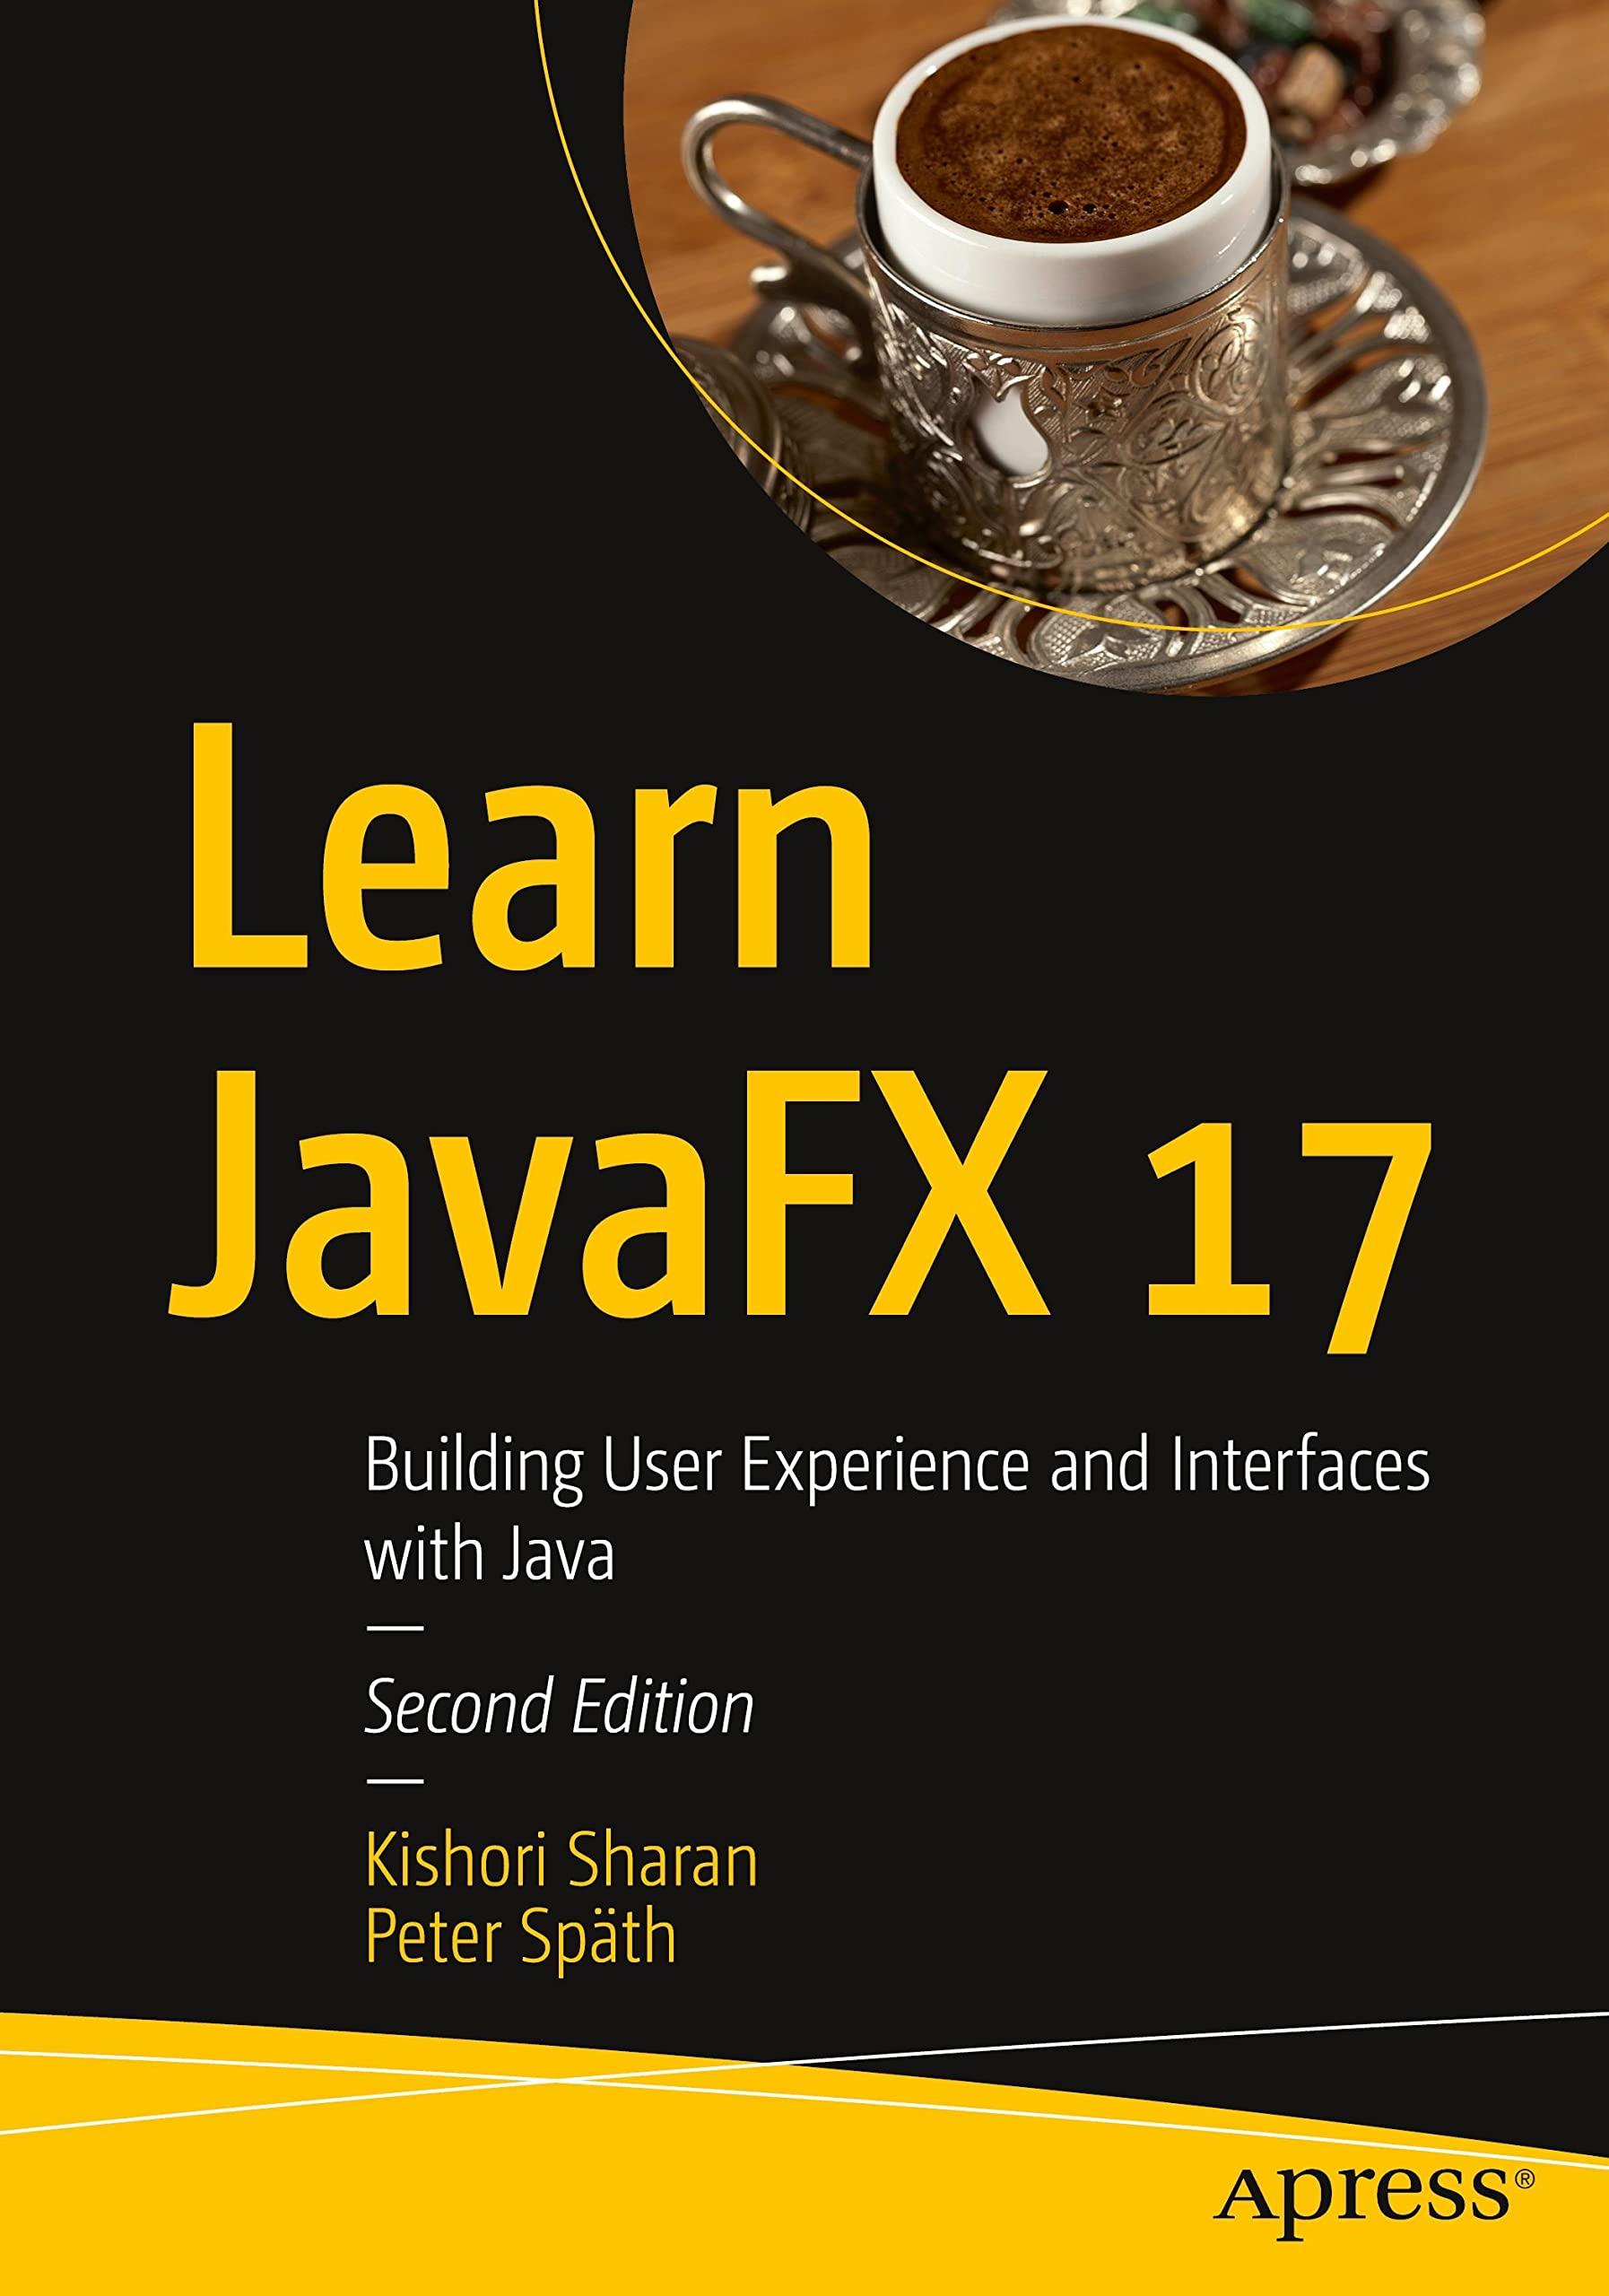 learn javafx 17 building user experience and interfaces with java 2nd edition kishori sharan , peter späth